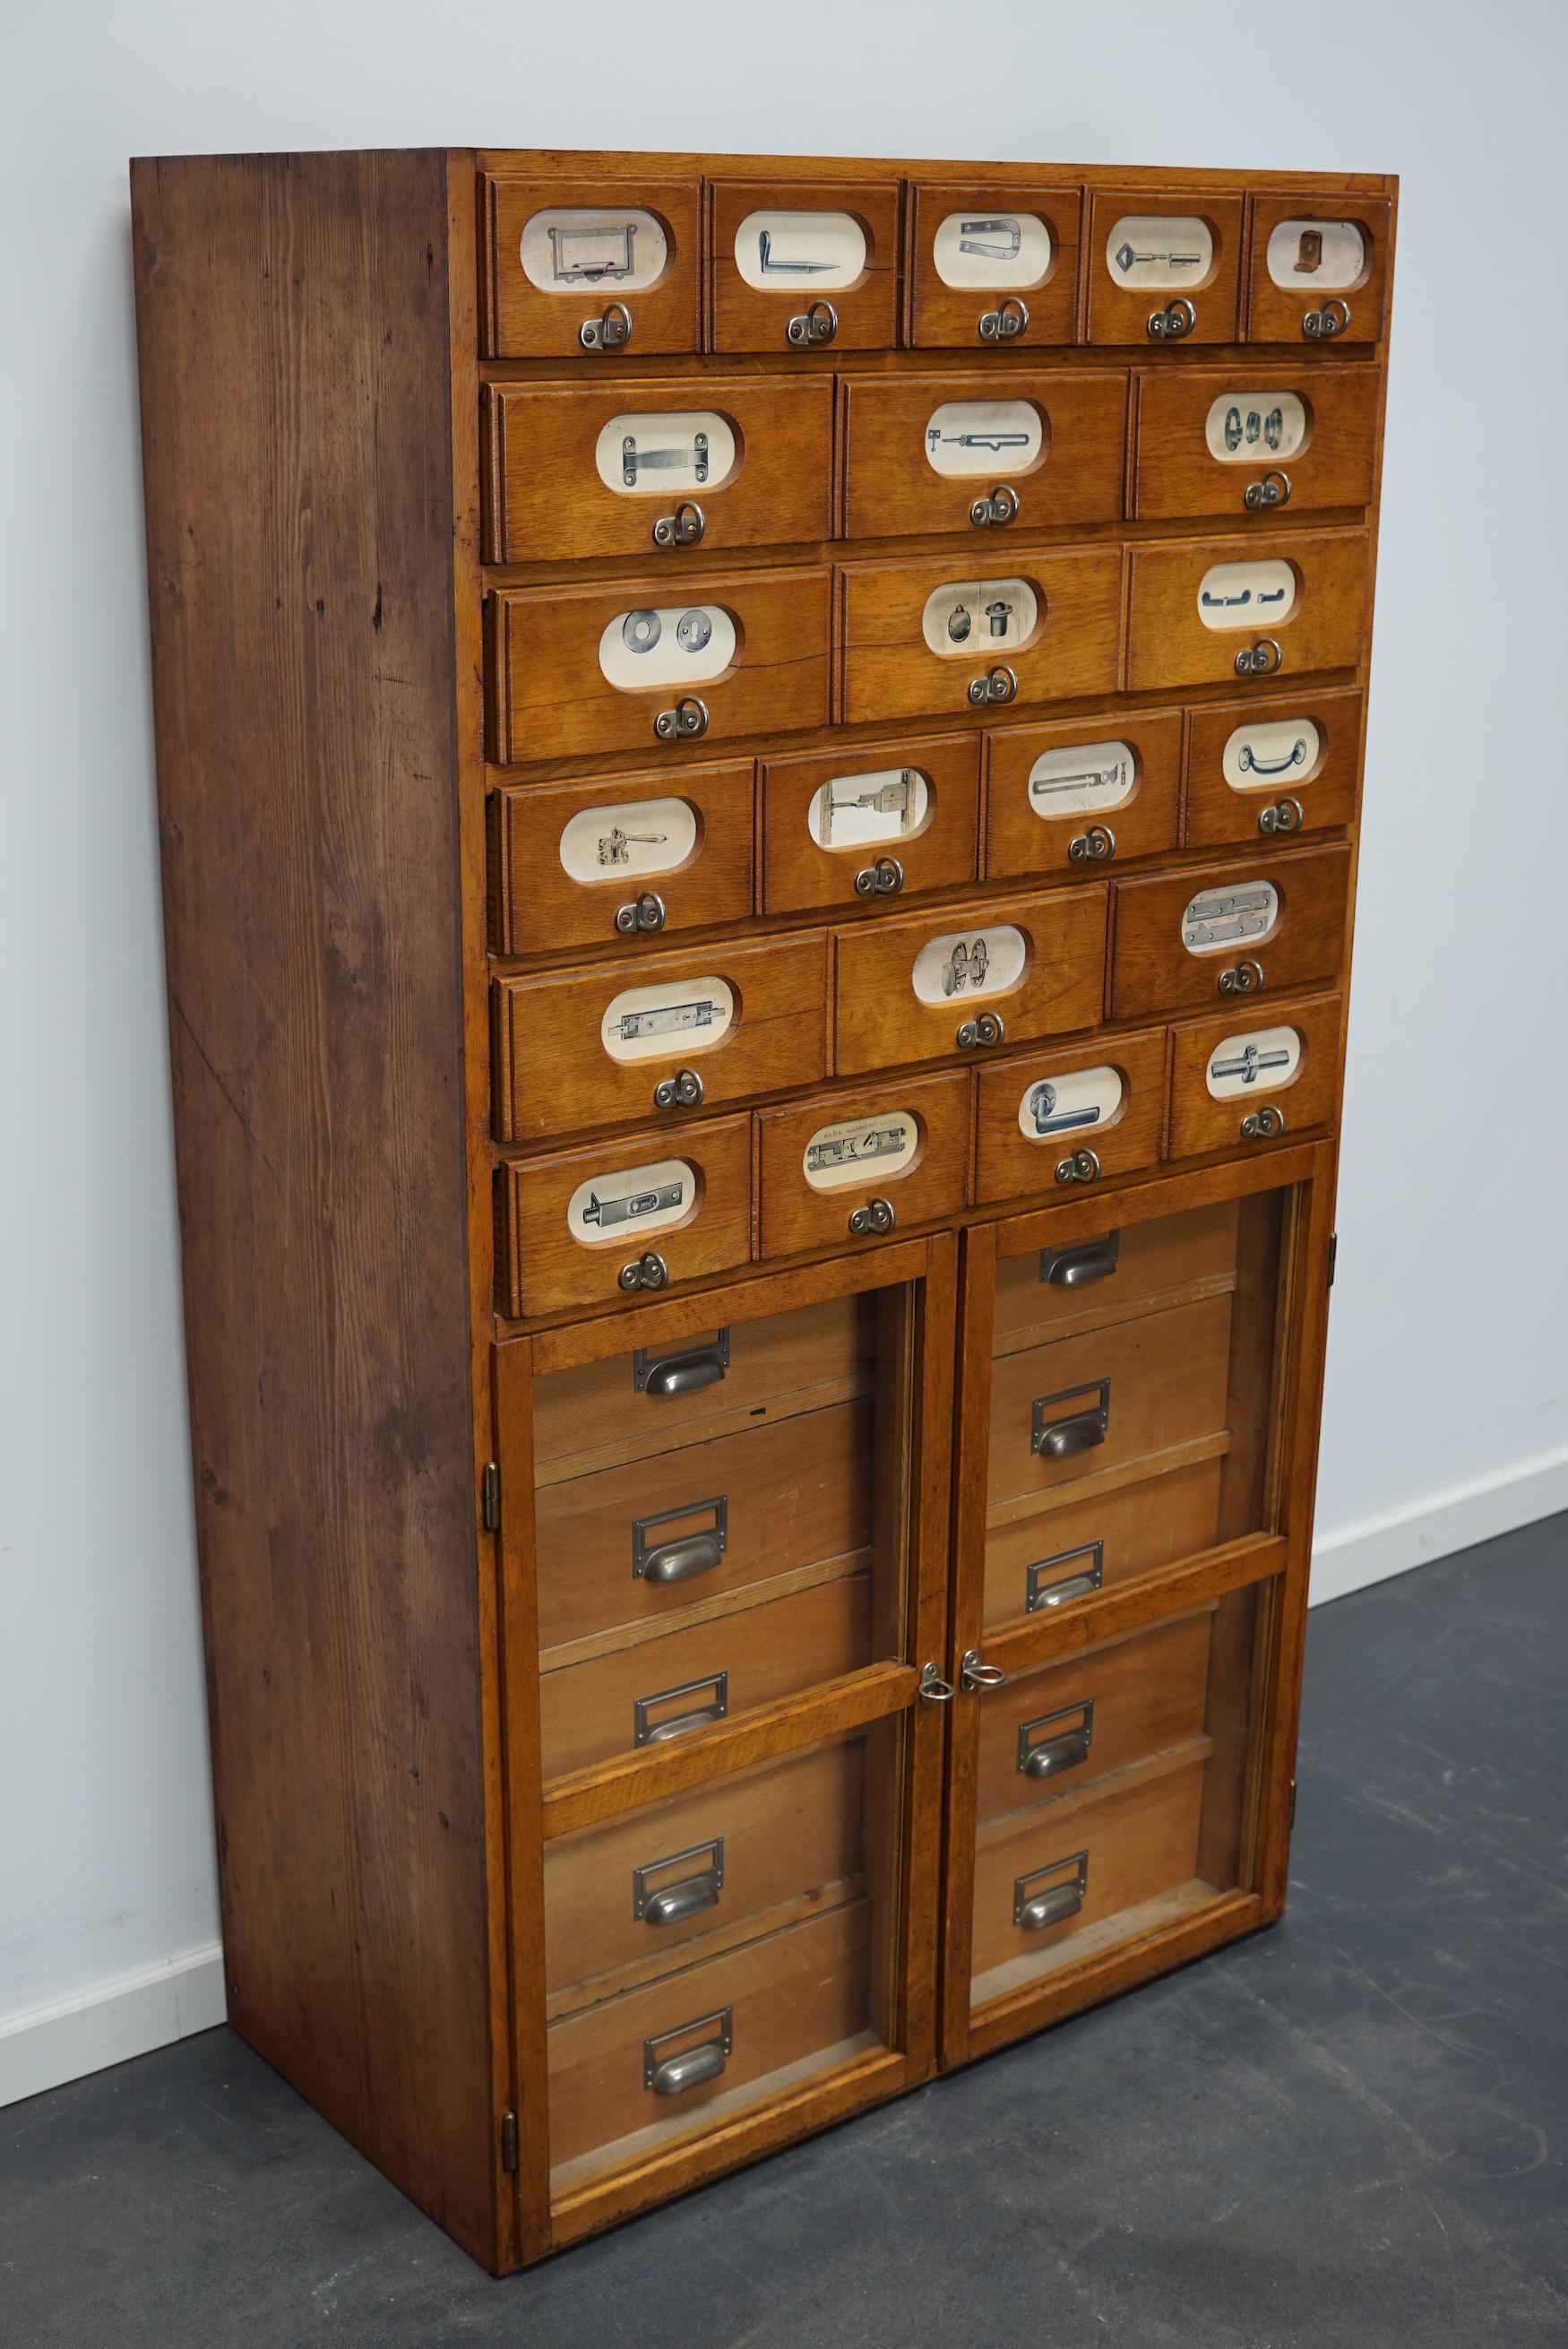 This apothecary cabinet was made circa 1940s in Germany and was later used in a hardware store in Belgium until recently. It features many drawers in different sizes with metal handles and the labels of the contents. It has two doors with glass